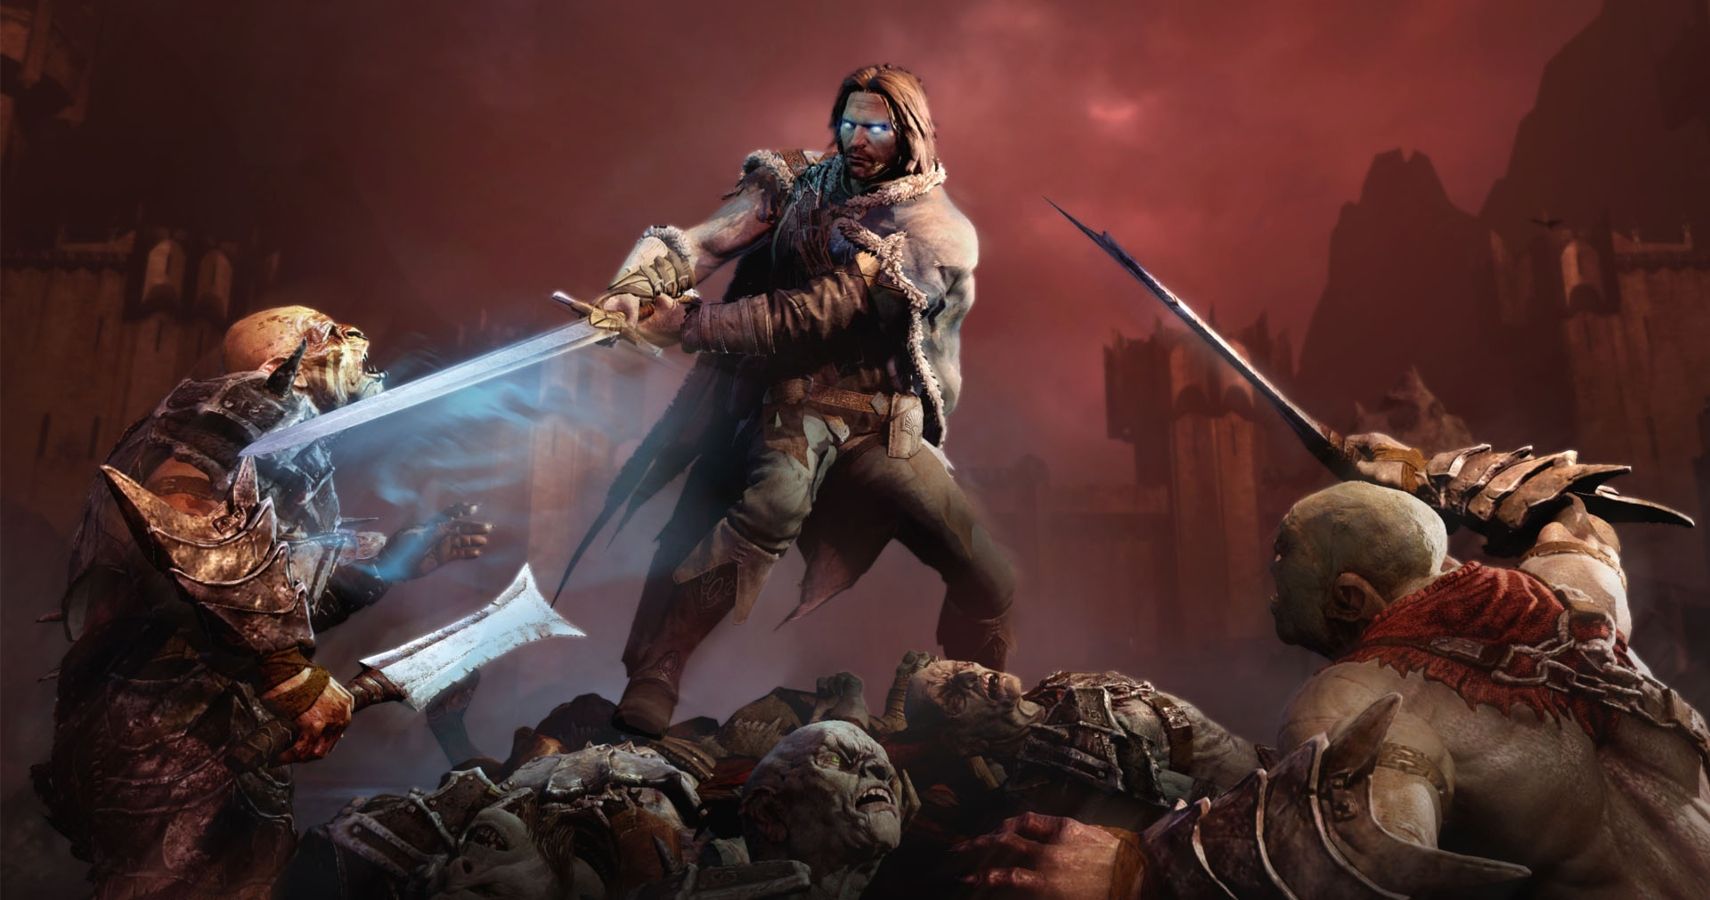 Middle-earth: Shadow of Mordor Vendetta missions, other online